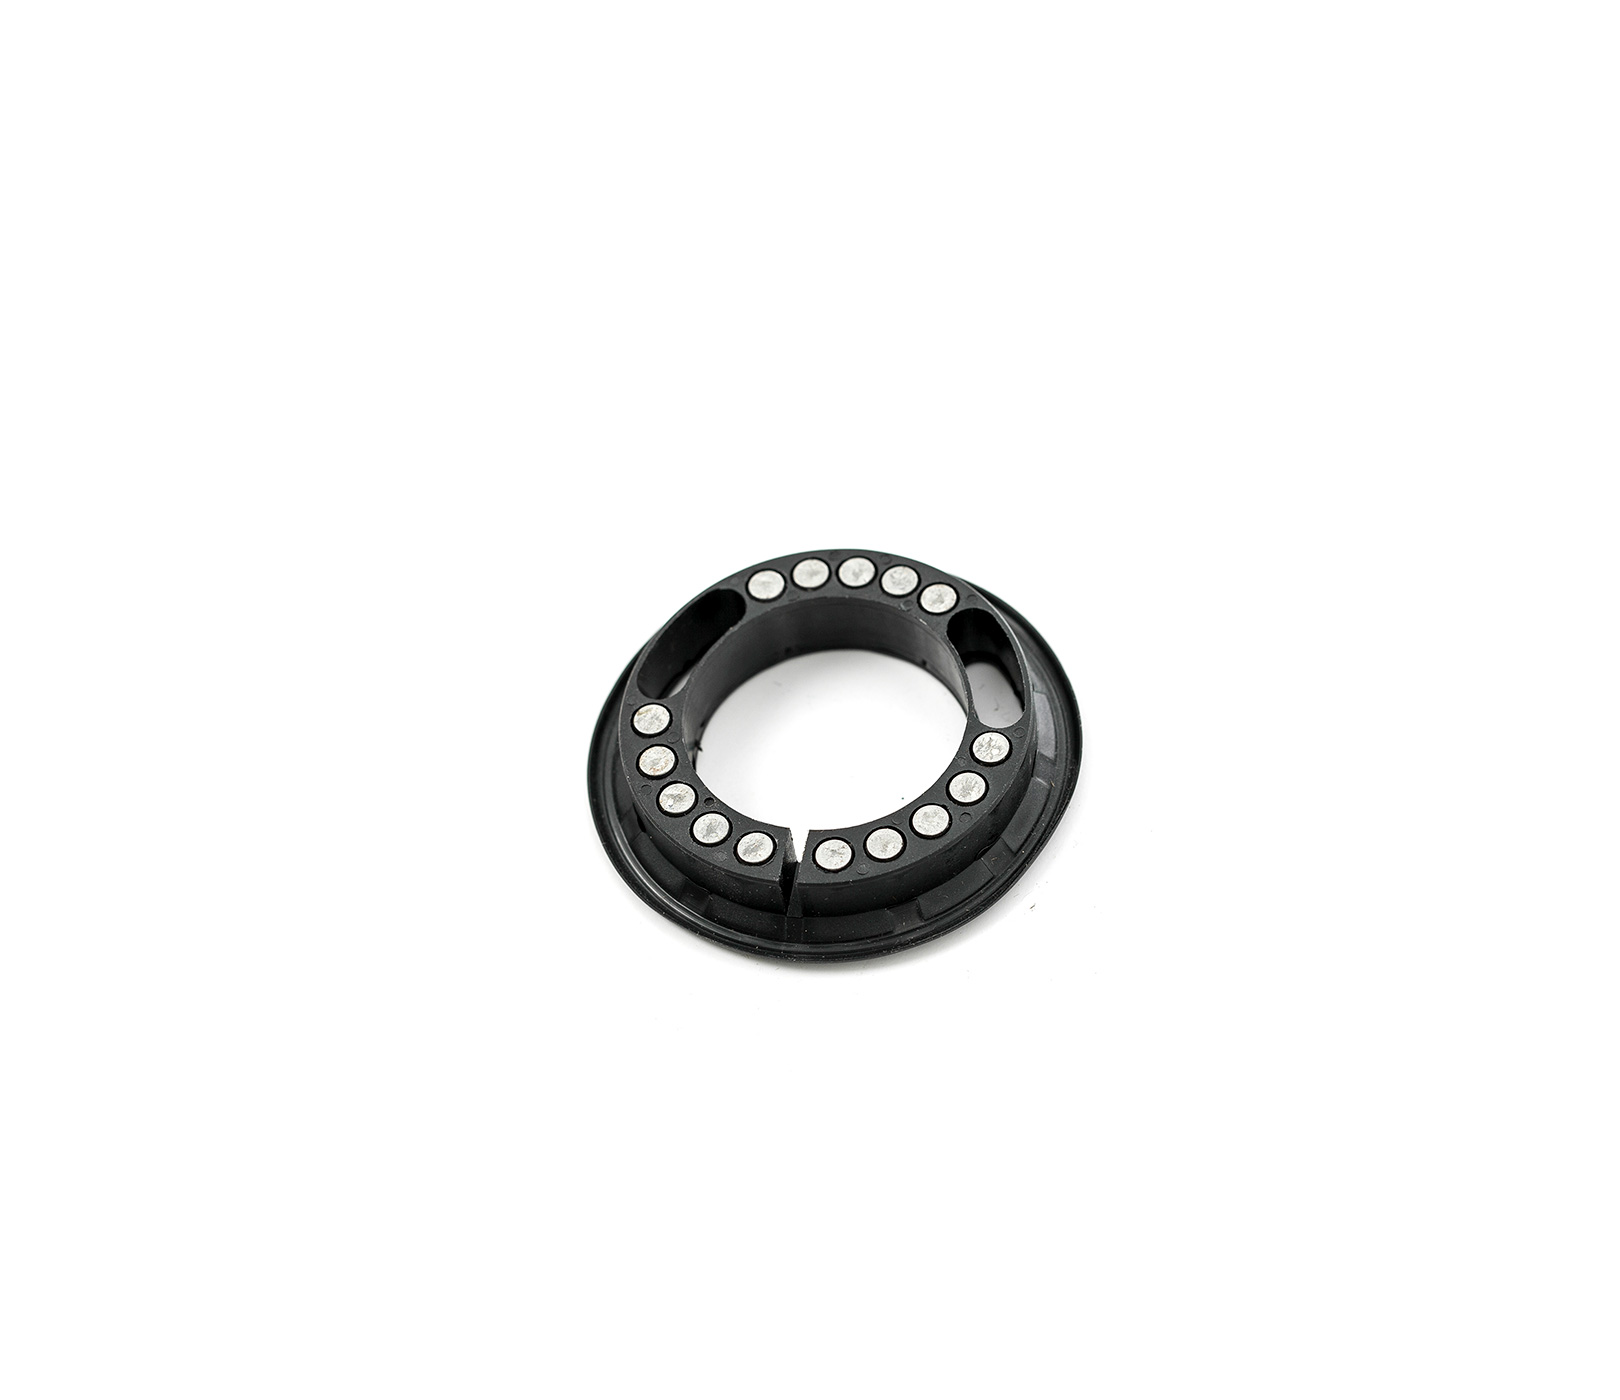 ORCA OMX ICR01 HEADSET COMPRESSION RING